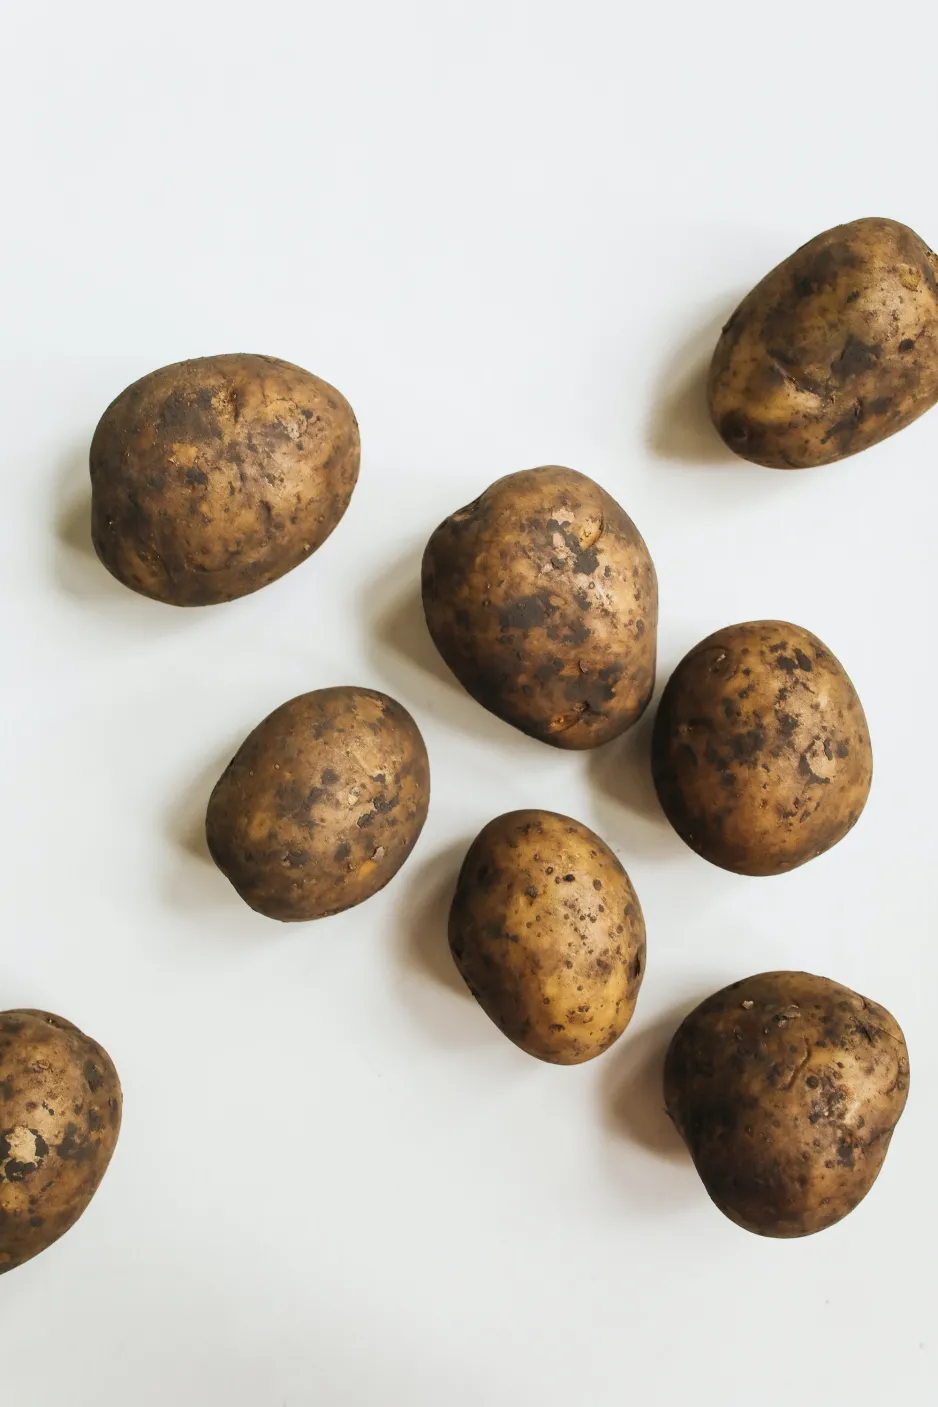 Several unwashed potatoes seen from above on a white background.